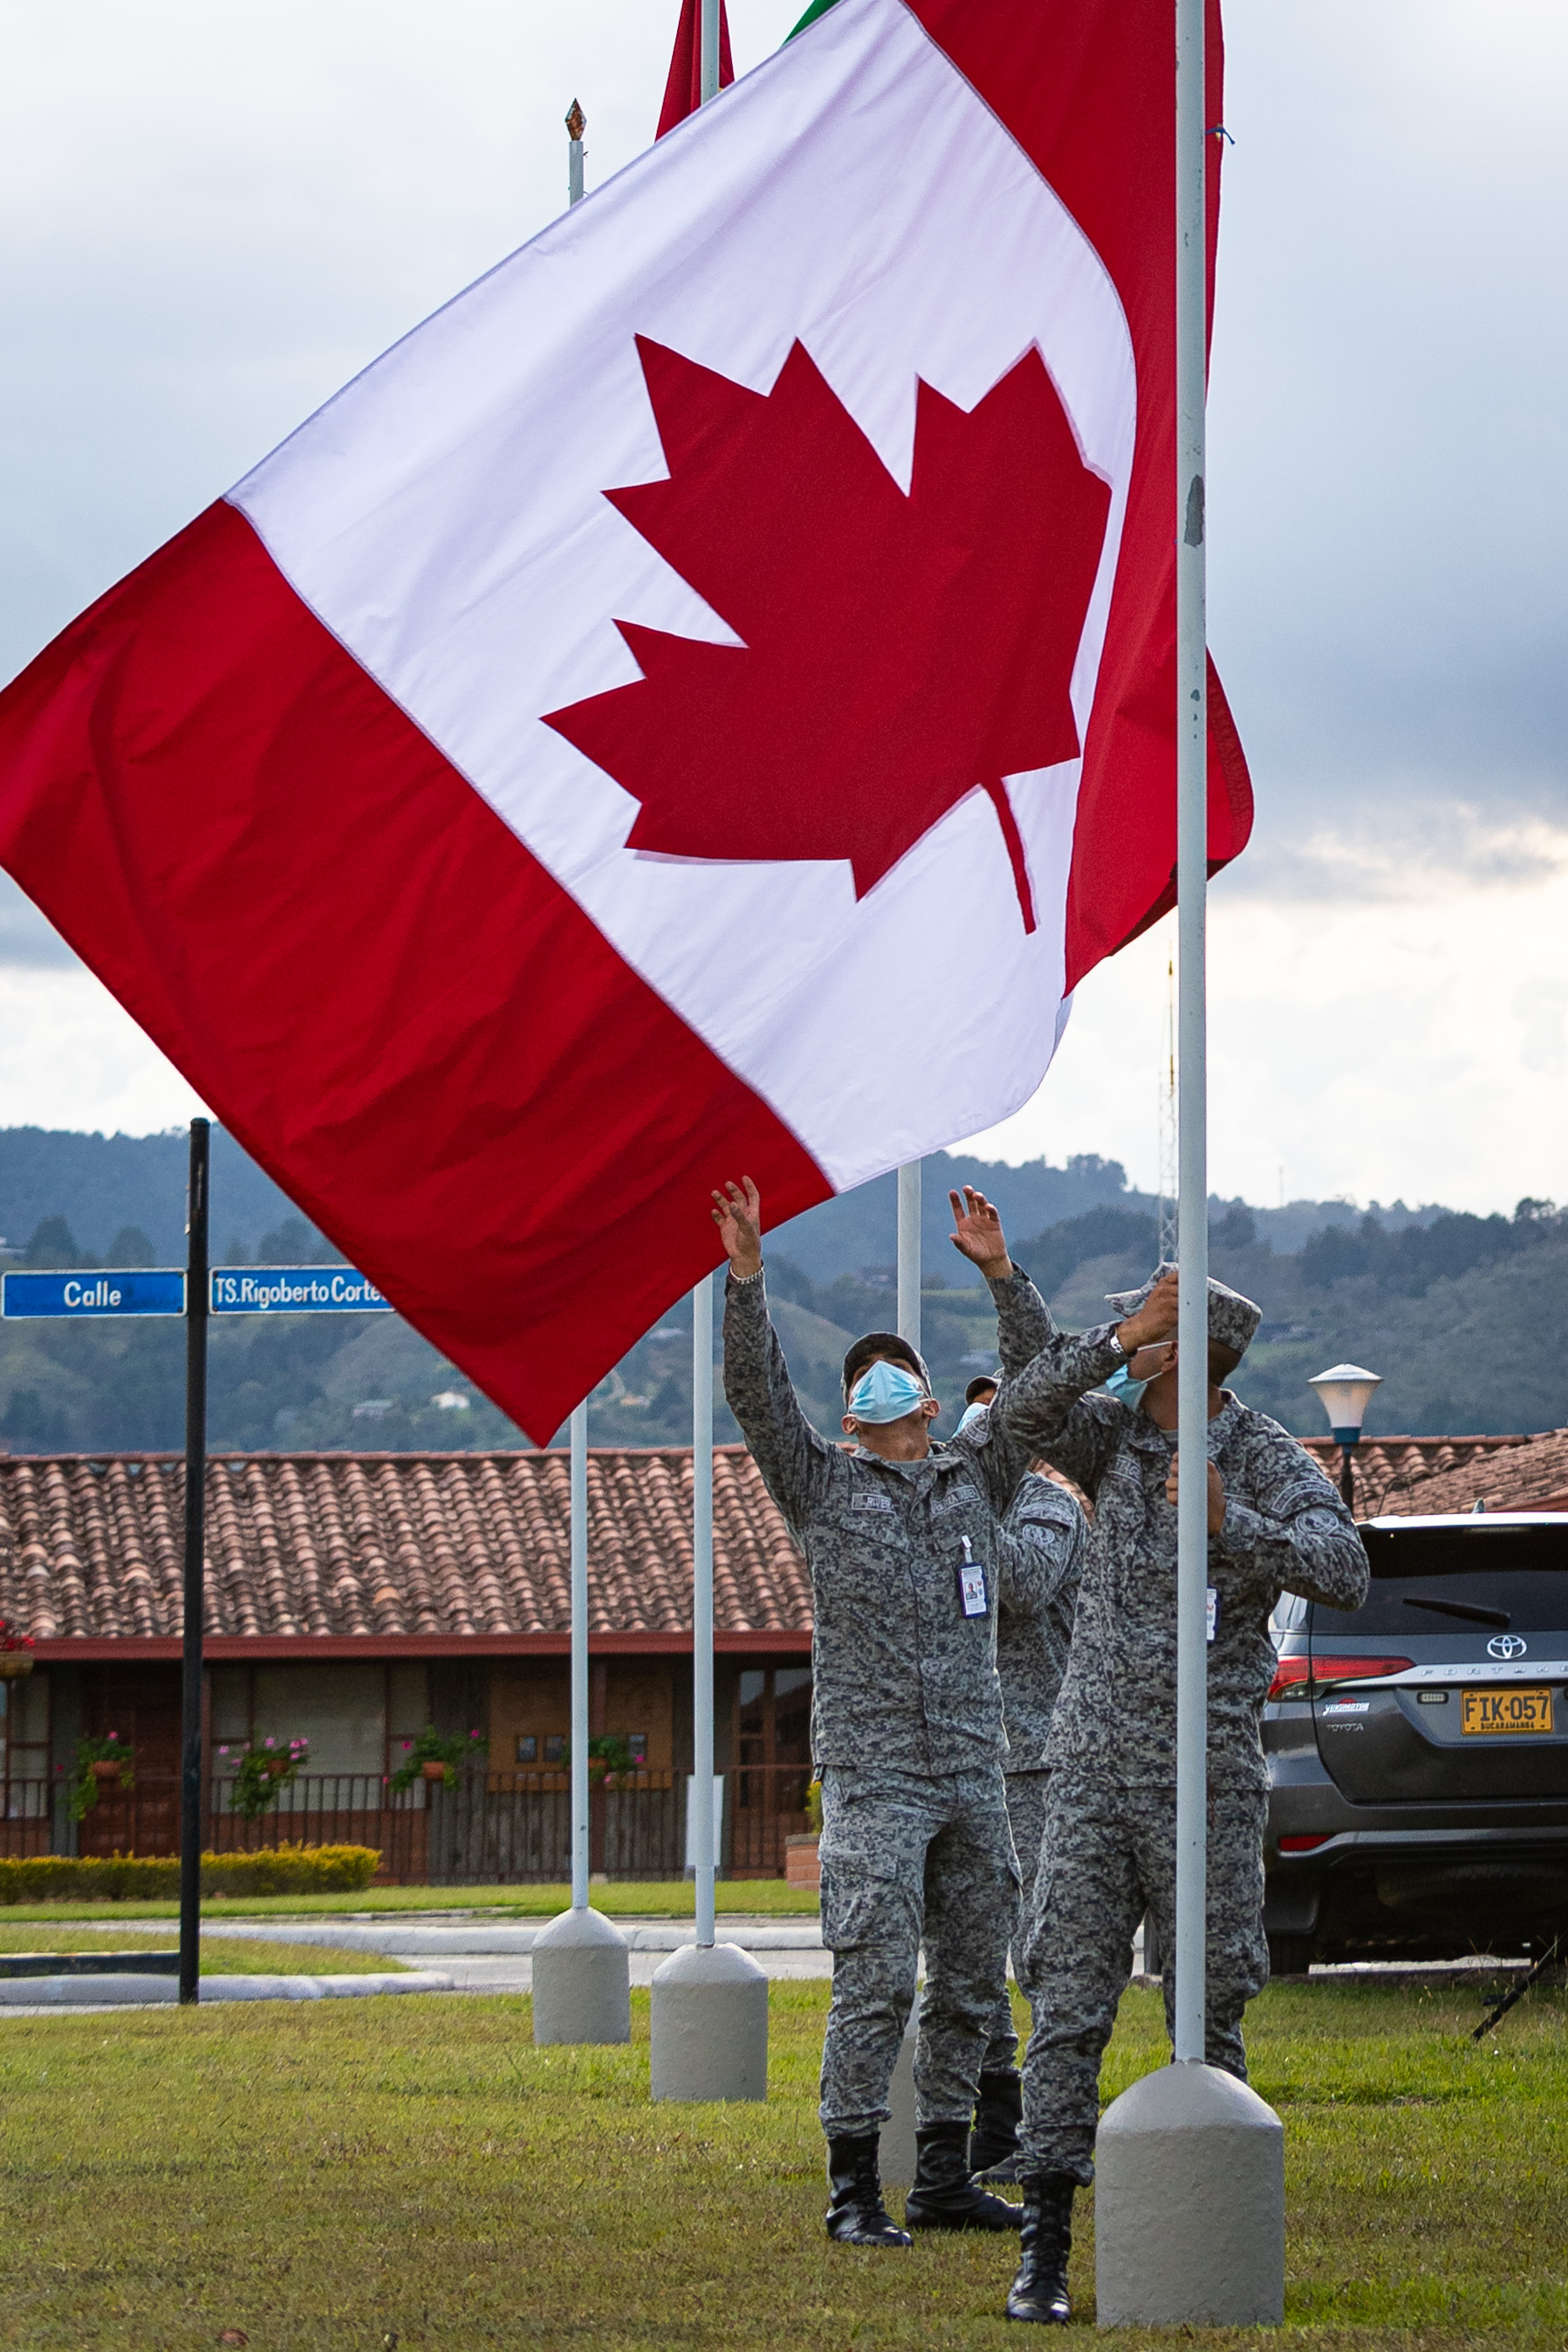 Members of the Colombian Air Force lower the Canadian flag at the end of the day during Exercise COOPERACION VII at Arturo Lema Posada Air Base in Colombia on 3 September 2021. PHOTO: Corporal Dominic Duchesne-Beaulieu